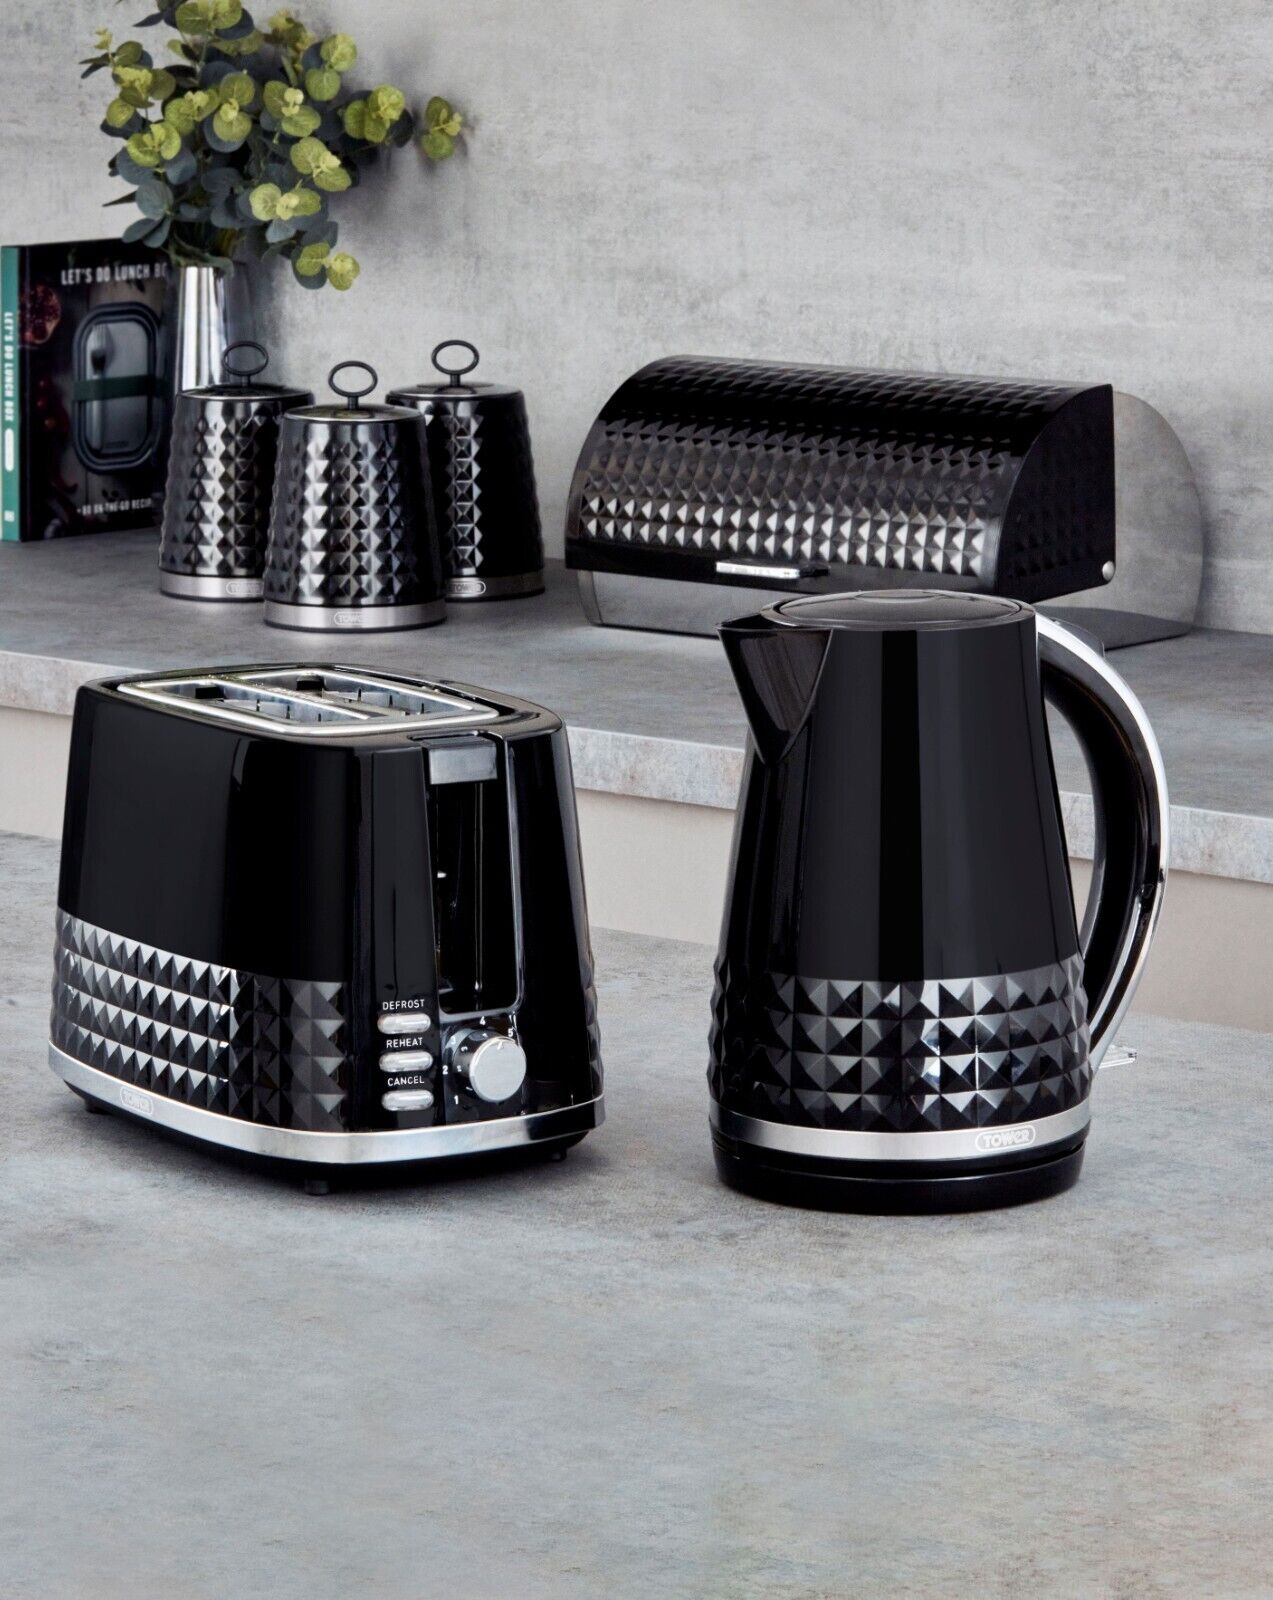 Tower Solitaire Black 1.5L 3KW Jug Kettle & 2 Slice Toaster Matching Set